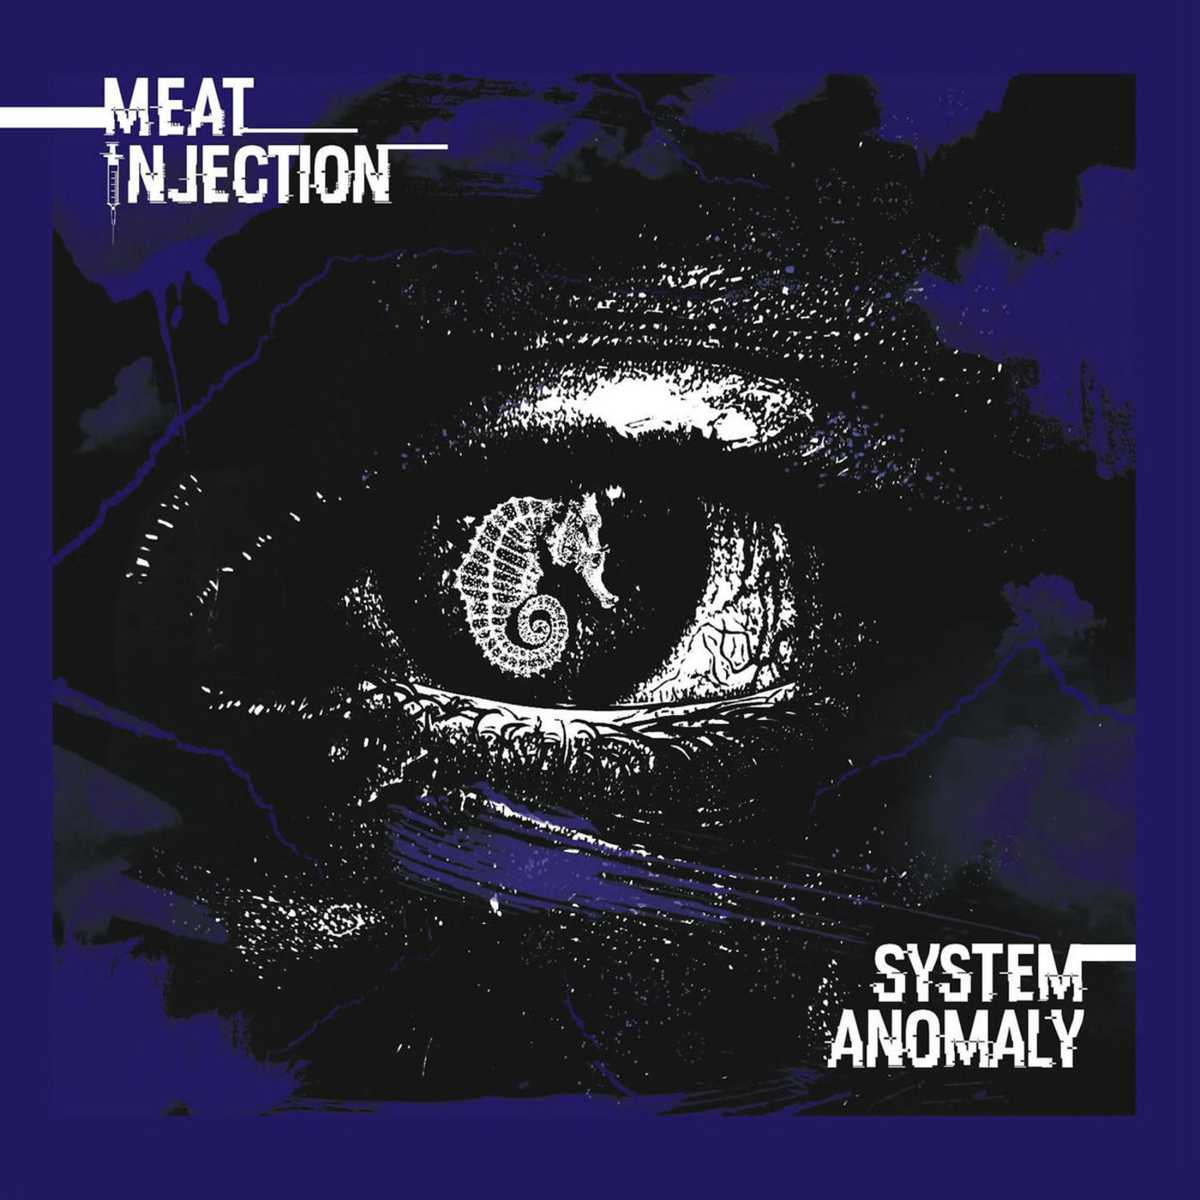 meatInjection_systemAnomaly2020